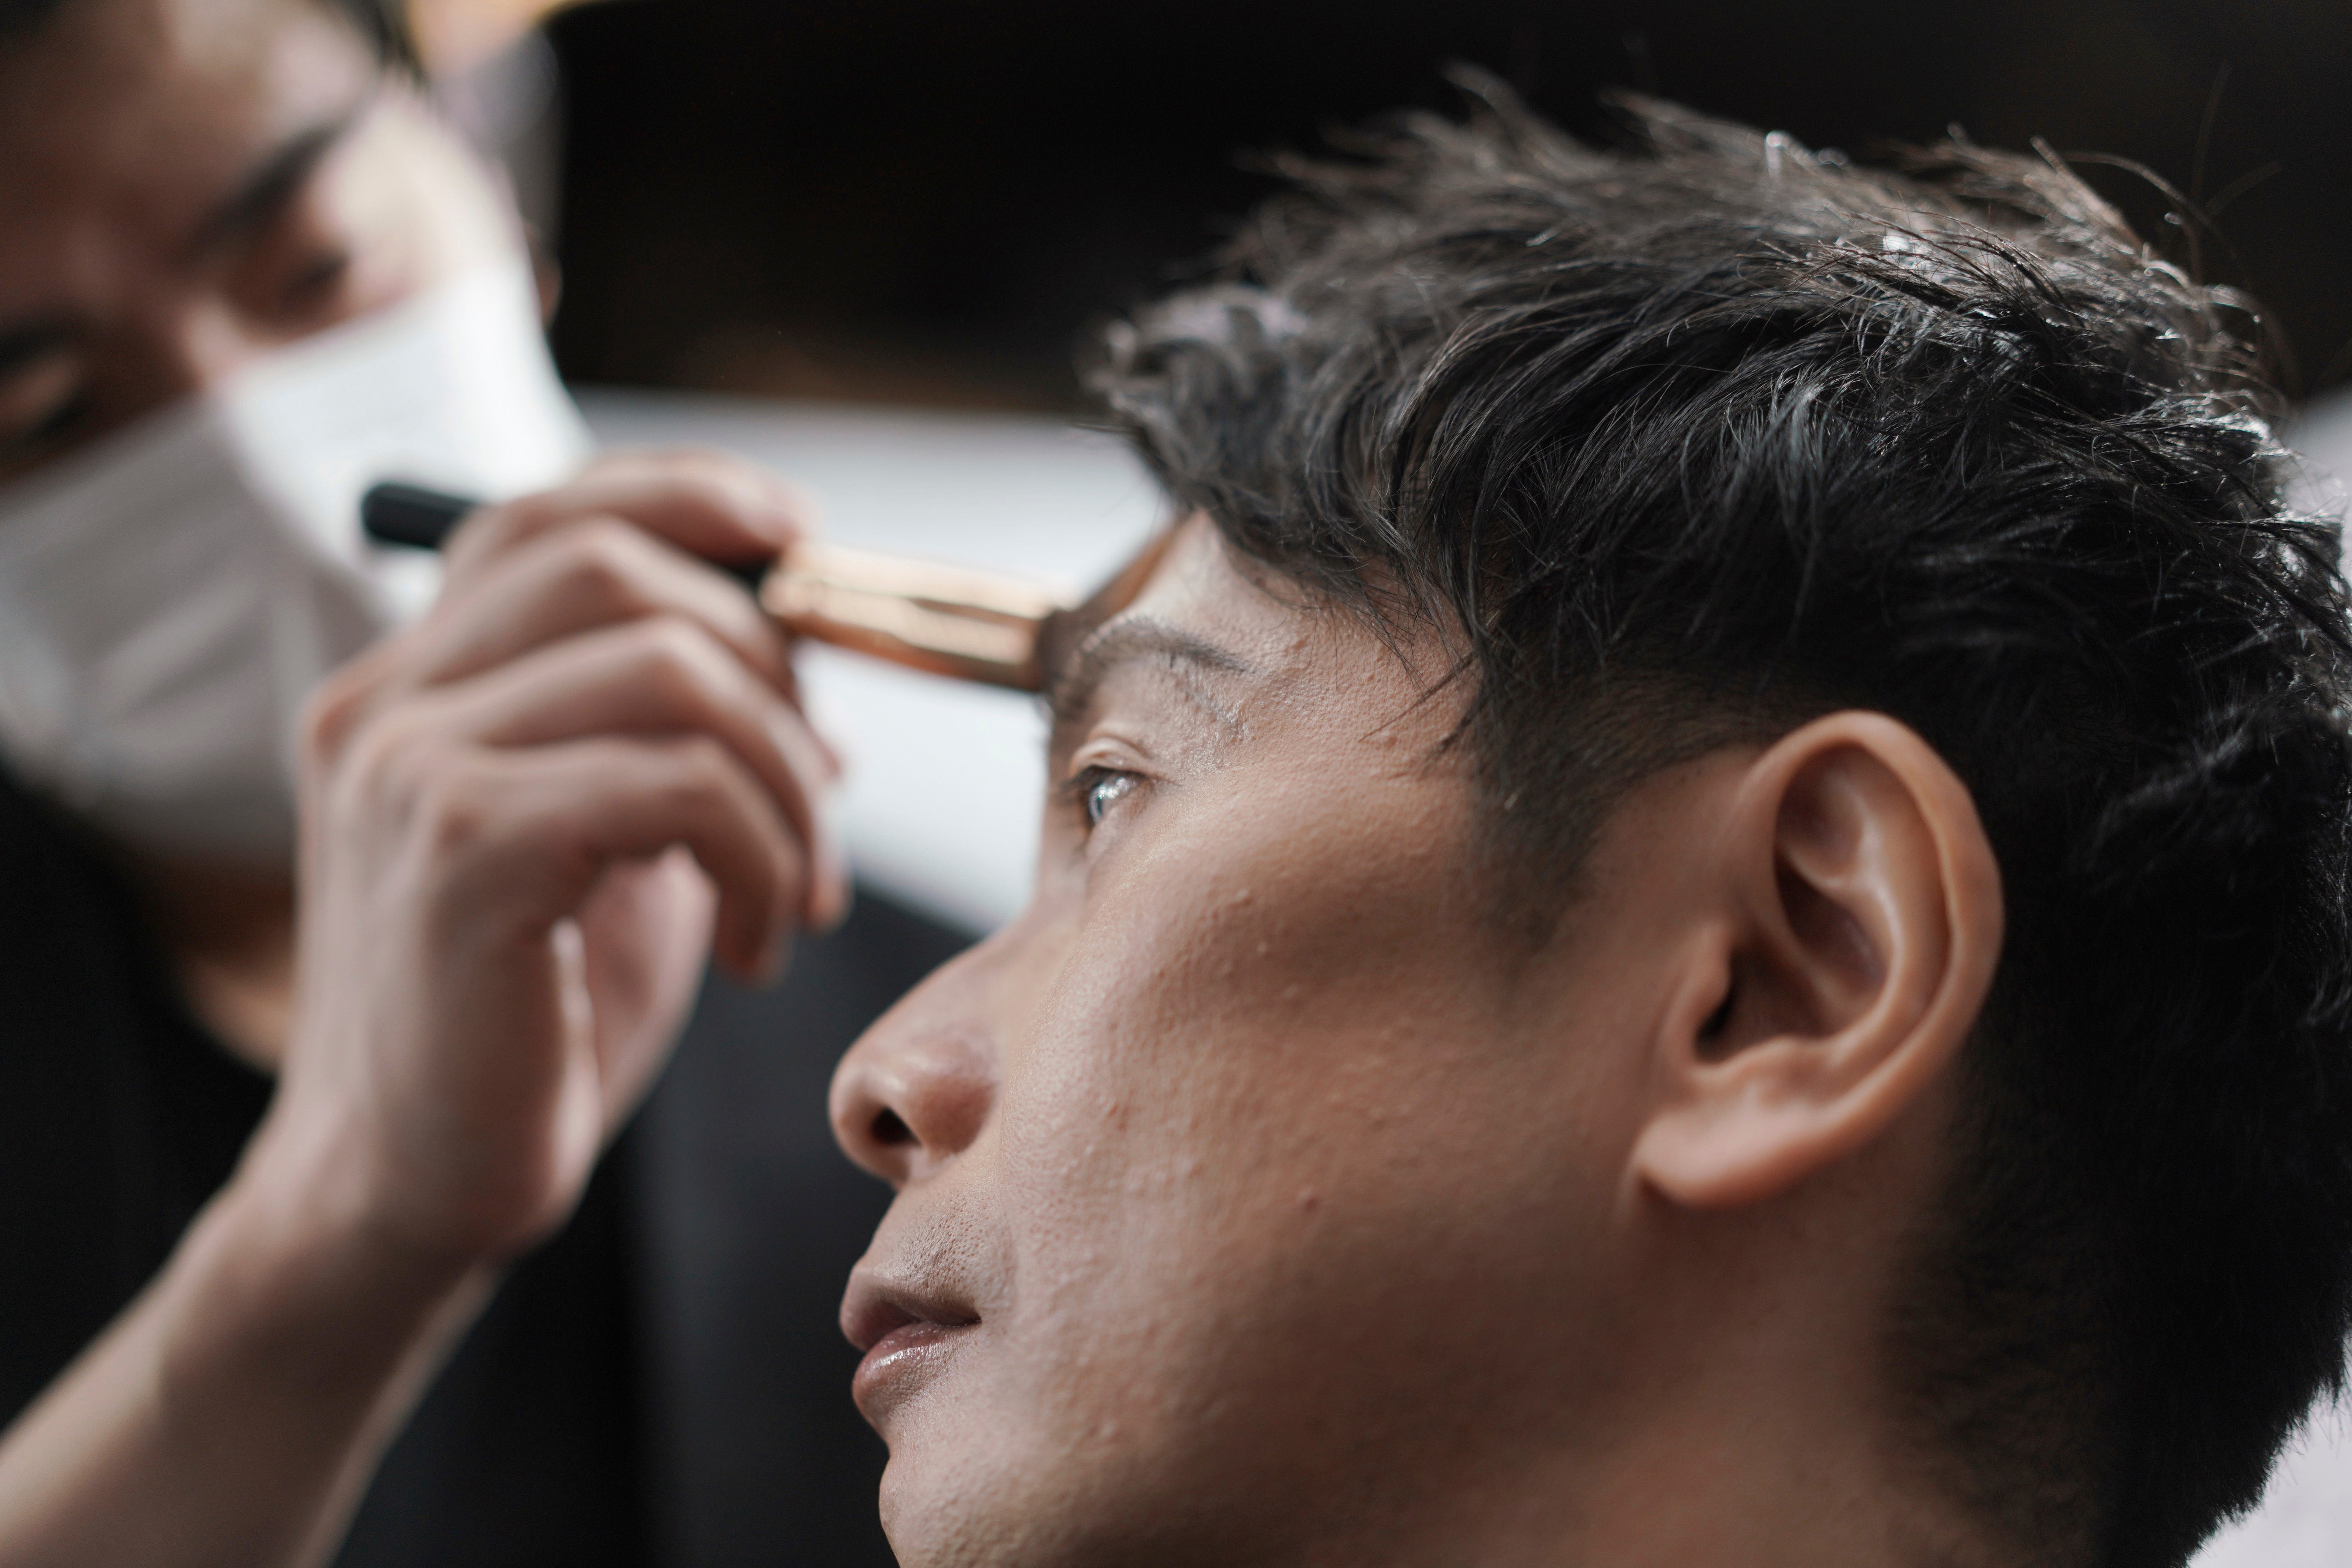 Japanese make-up industry boosted by older businessmen wanting to look good in online meetings | The Independent